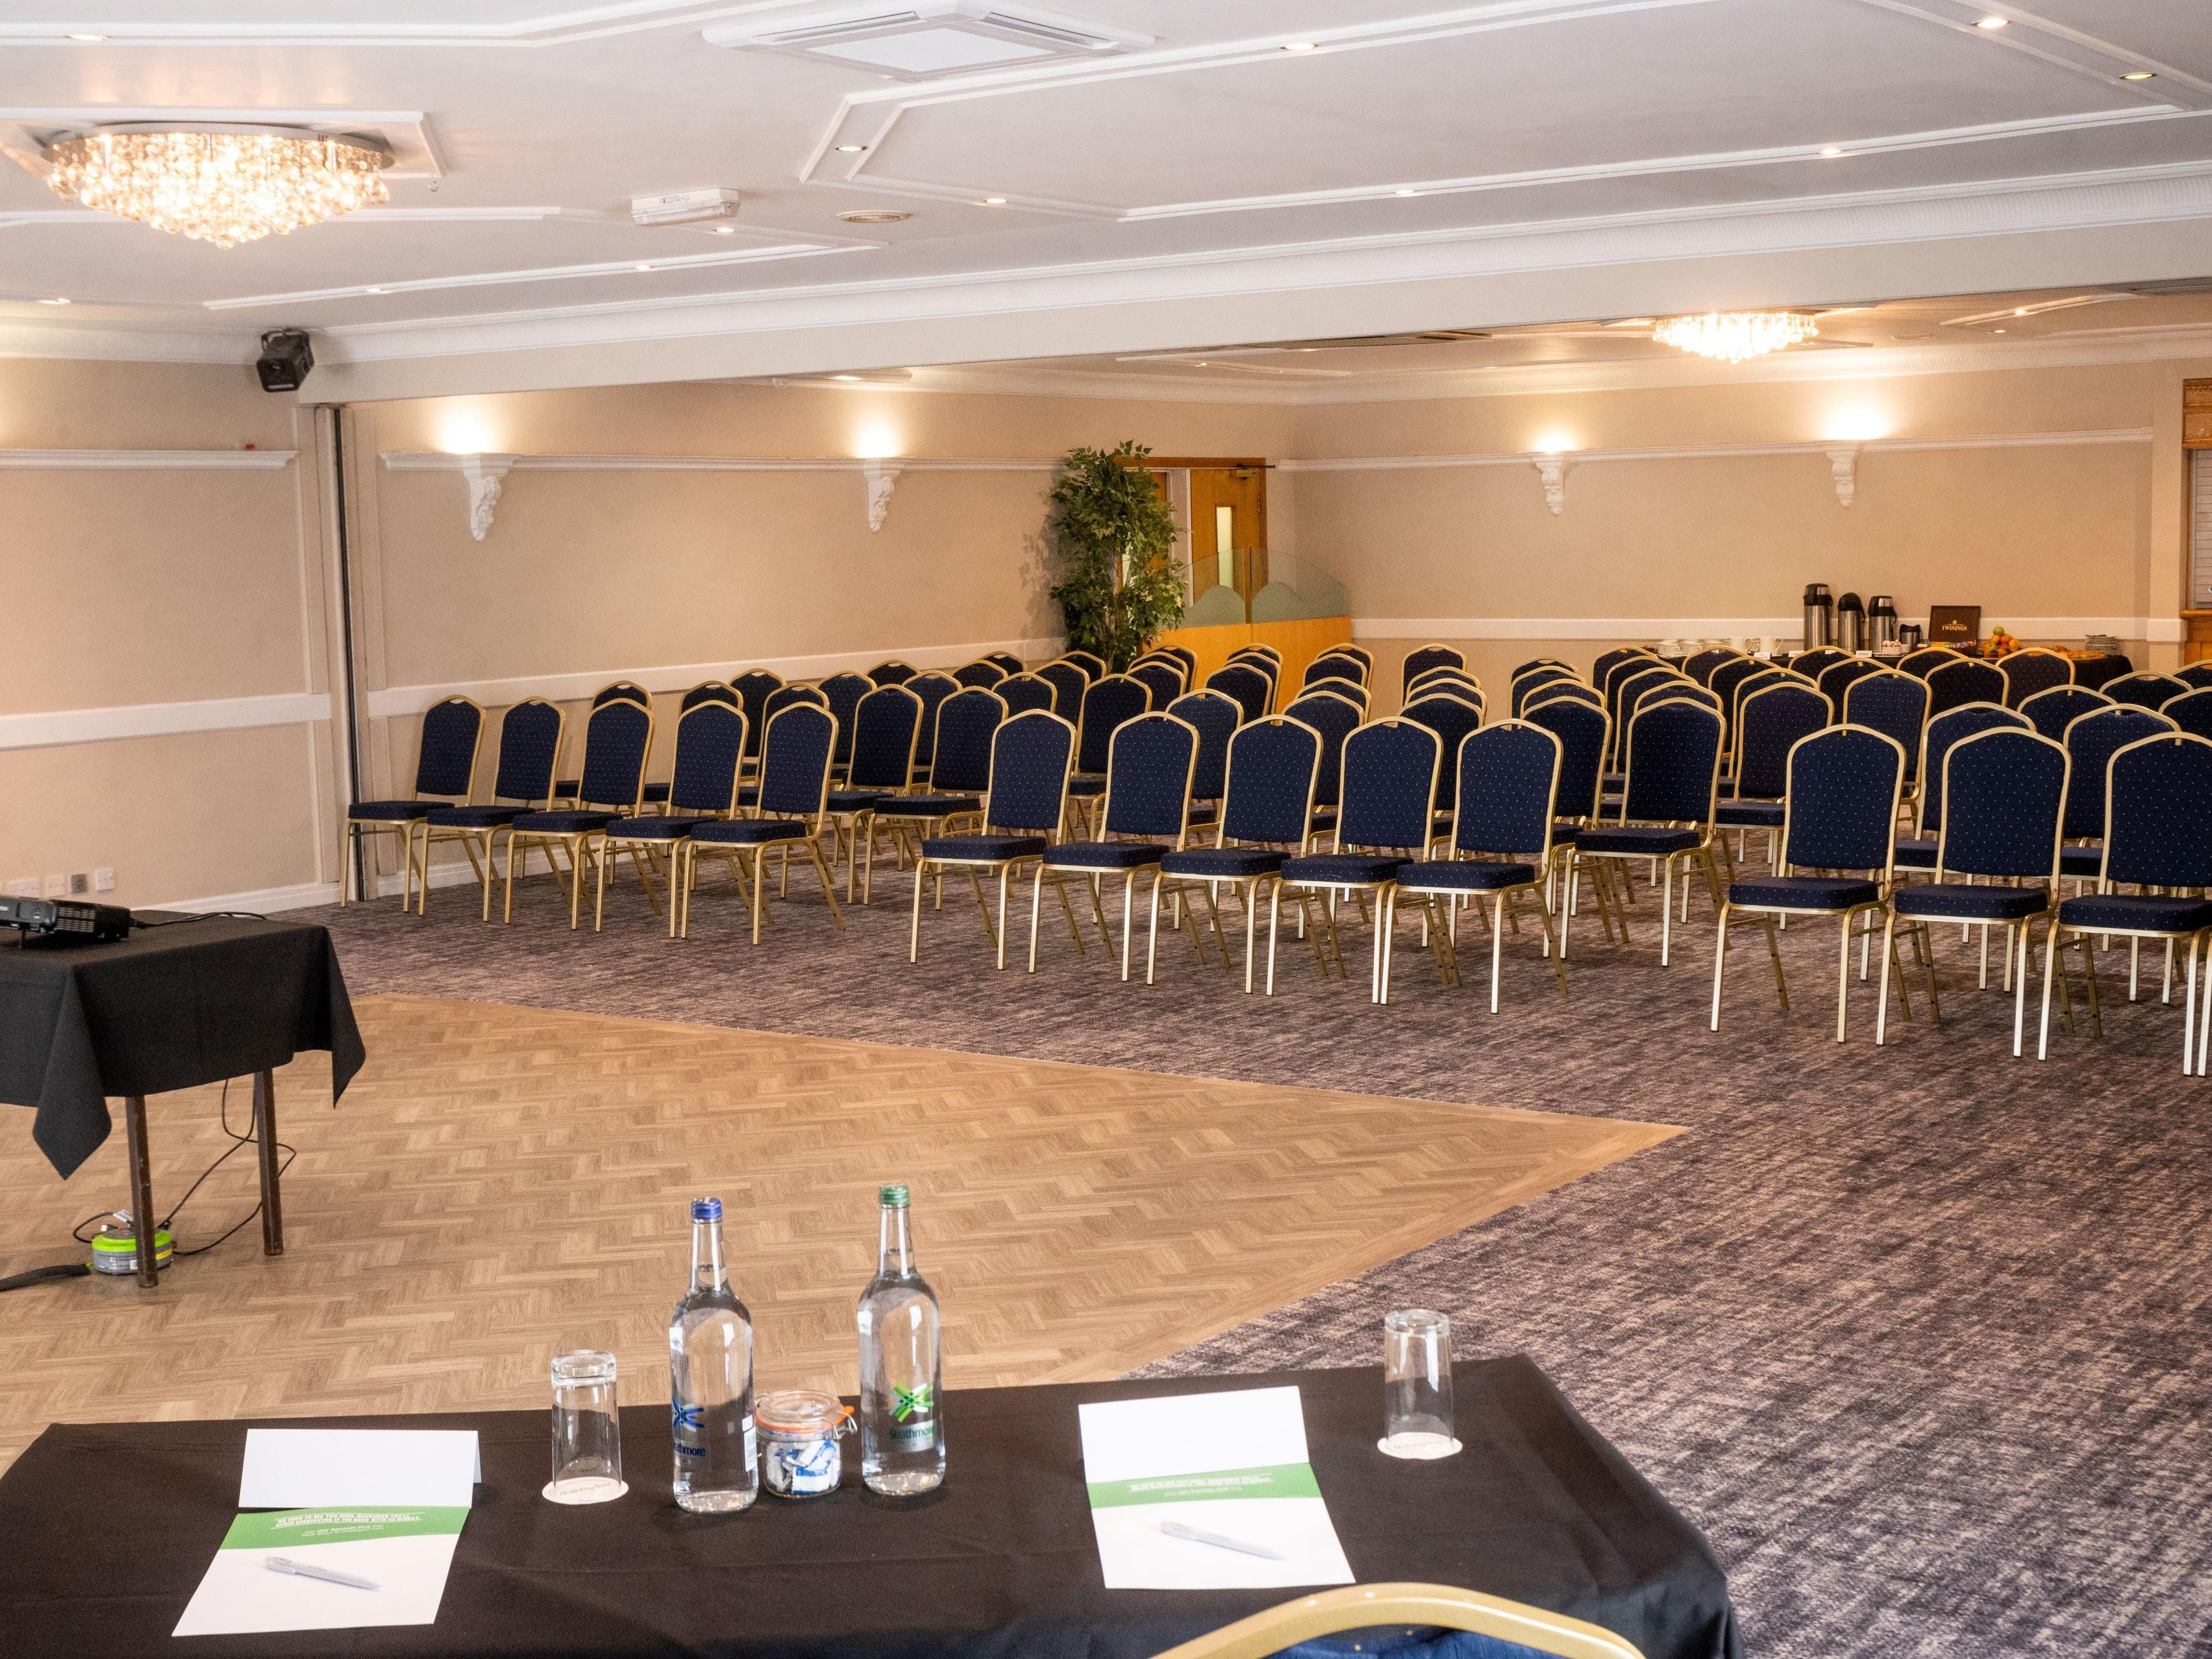 With a choice of three stunning conference rooms and meeting spaces catering for up to 200 delegates, Holiday Inn A55 Chester West makes for the most perfect meeting venue. From small team meetings, or sports presentation evenings to large product launches and award ceremonies. We are perfectly located just off the A55, with masses of free parking.